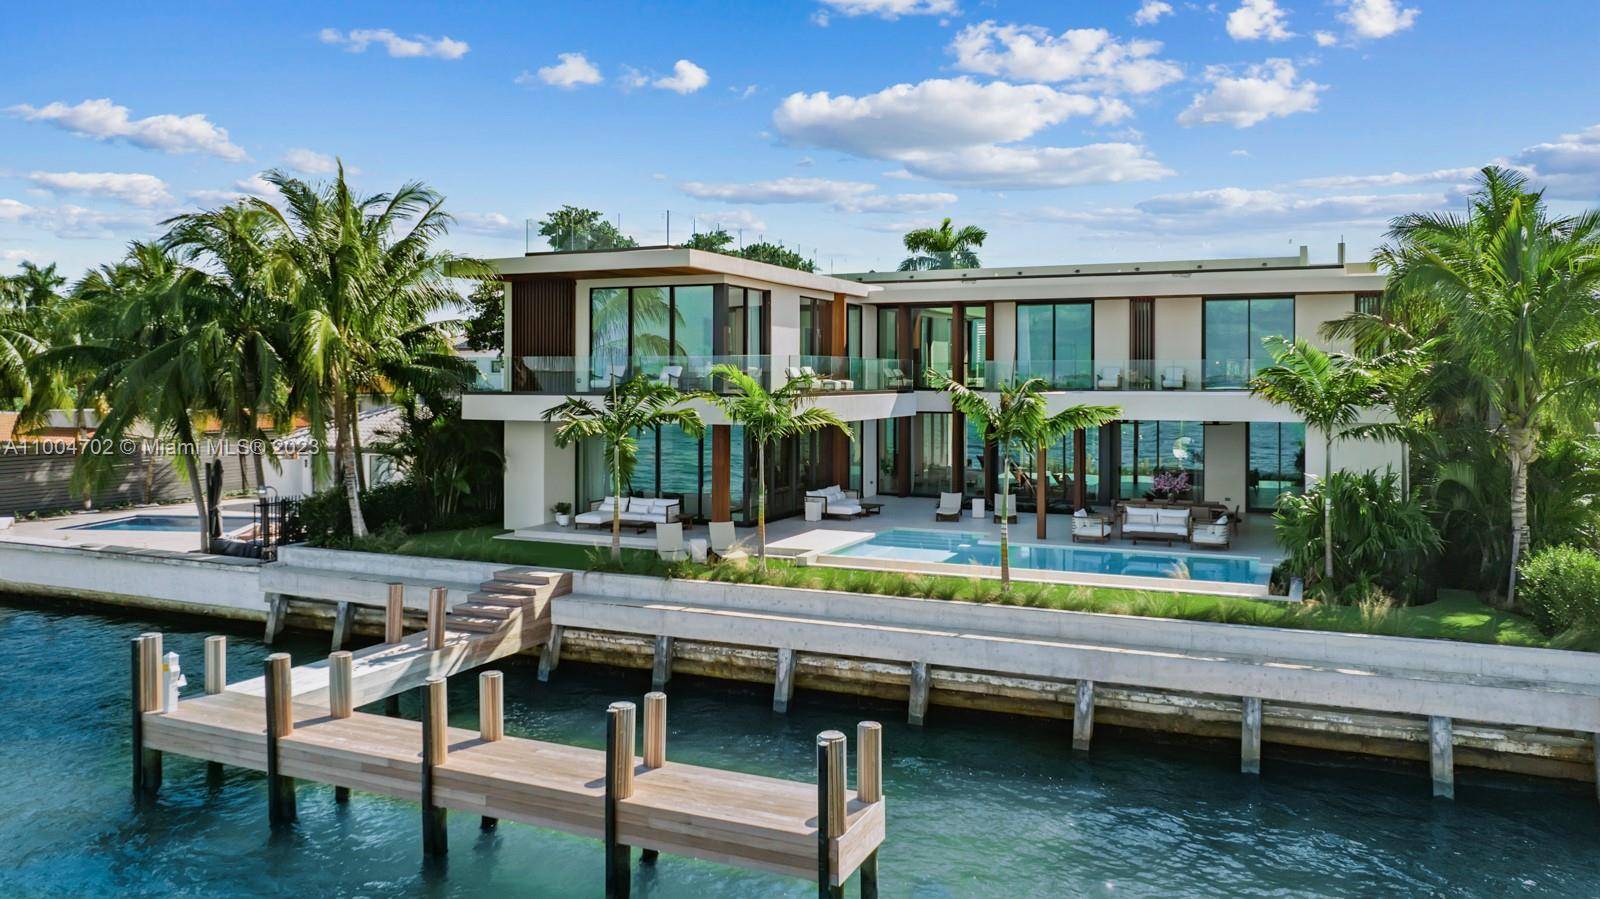 Stunning new construction modern waterfront home situated on oversized 15, 000 SQ FT with over 100 feet of waterfront.